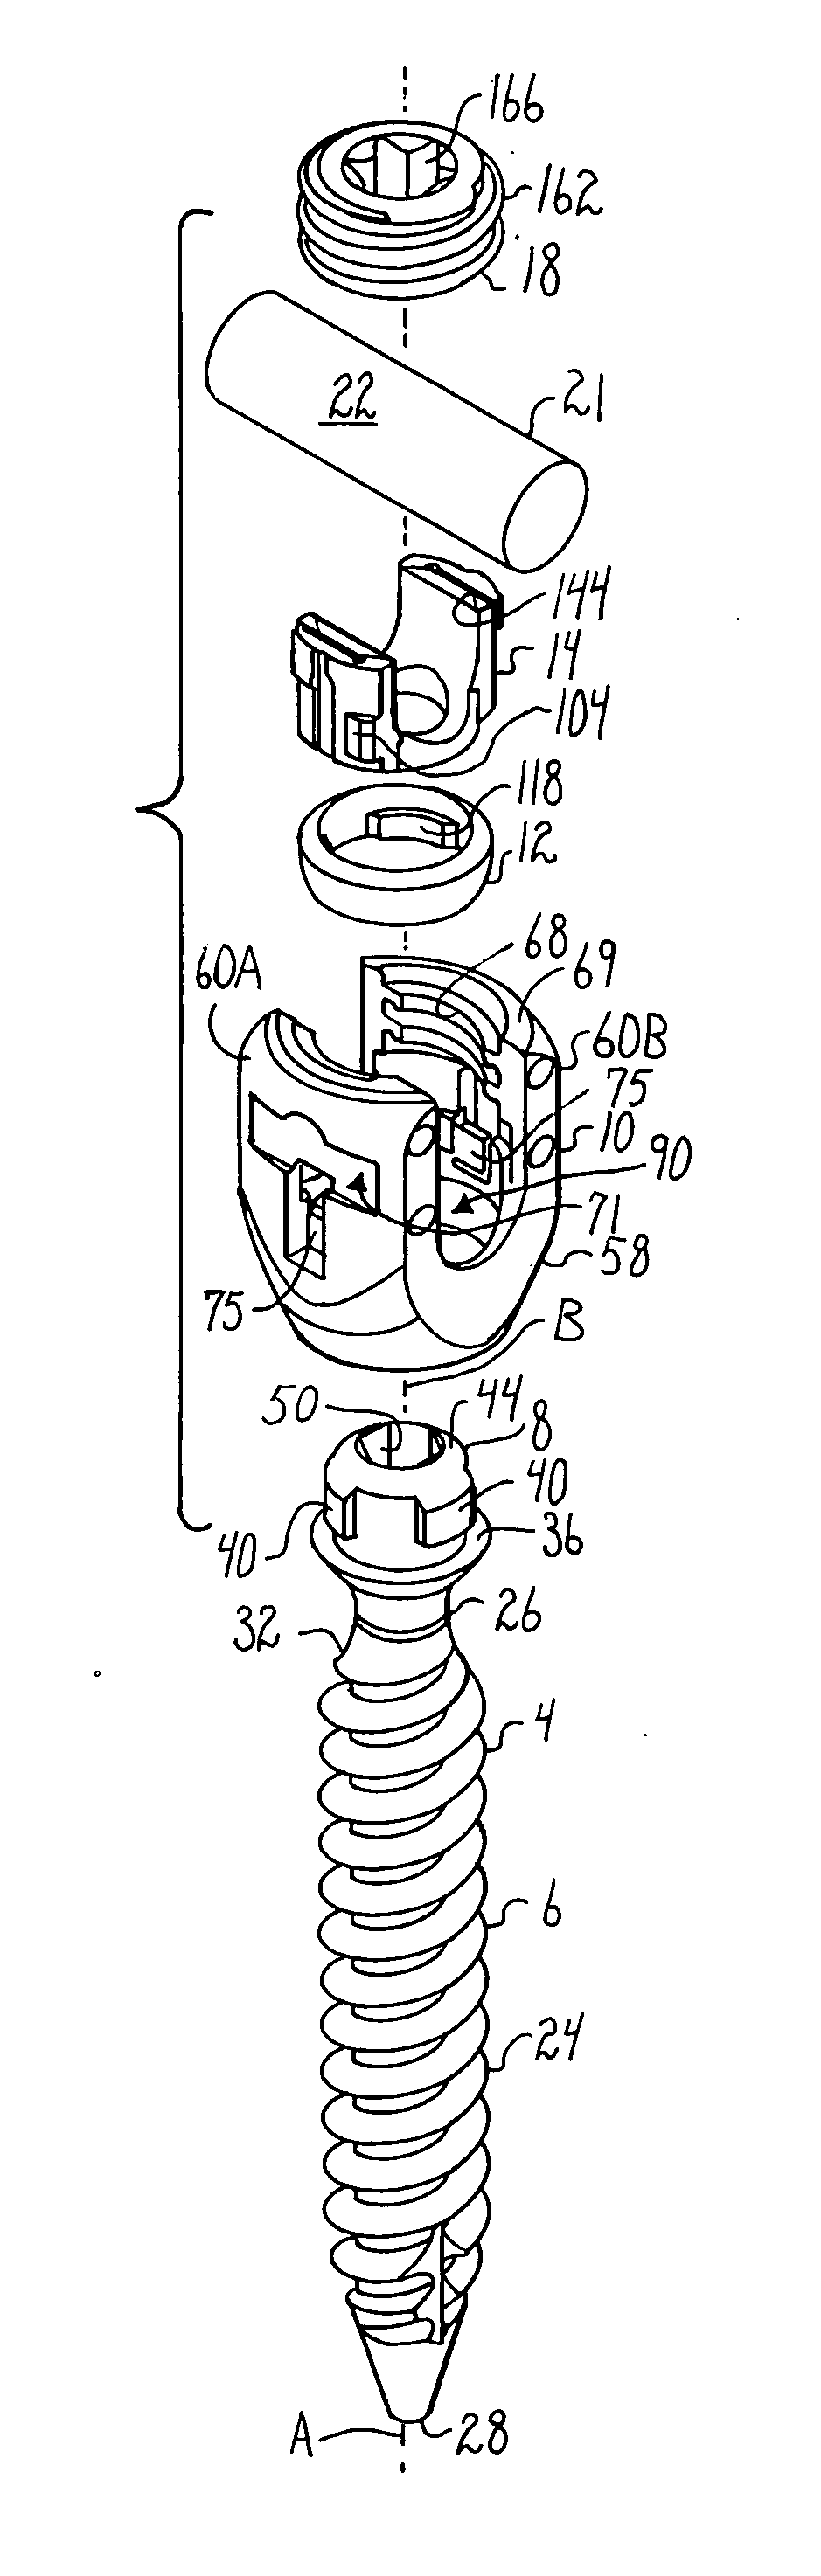 Polyaxial bone screw with cam connection and lock and release insert